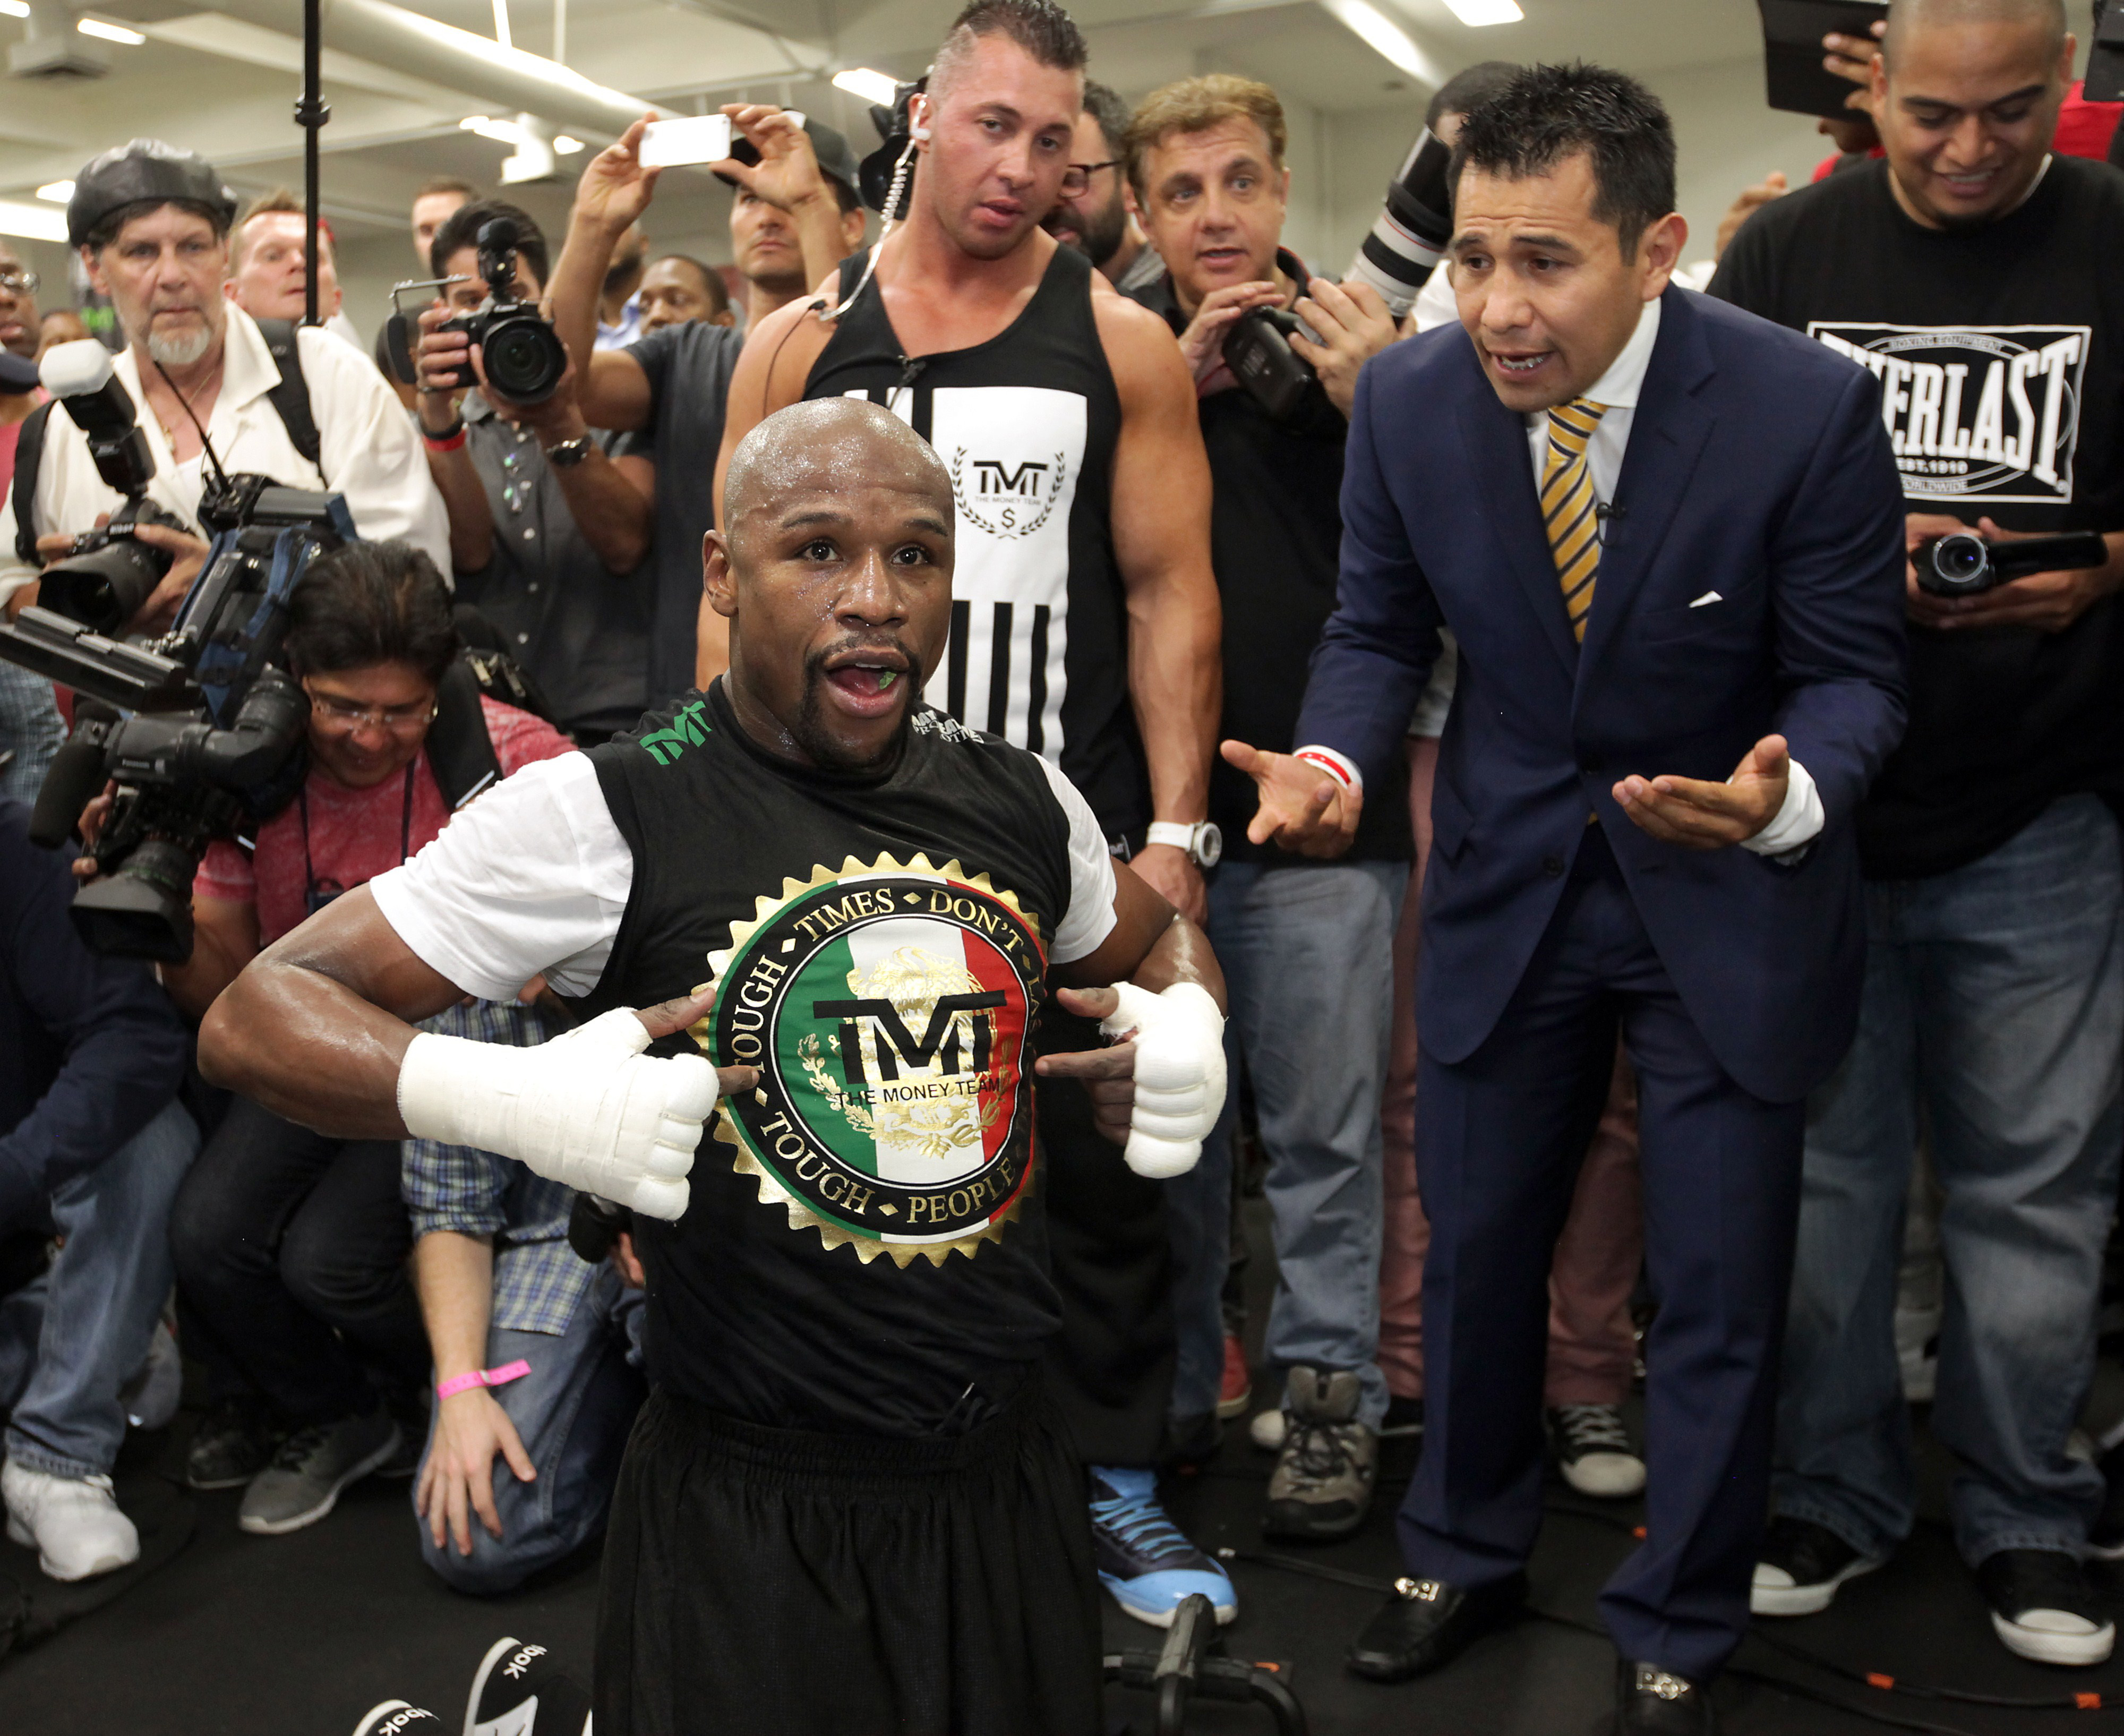 WBC/WBA welterweight champion Floyd Mayweather Jr. works out at the Mayweather Boxing Club on April 14, 2015 in Las Vegas, Nevada.